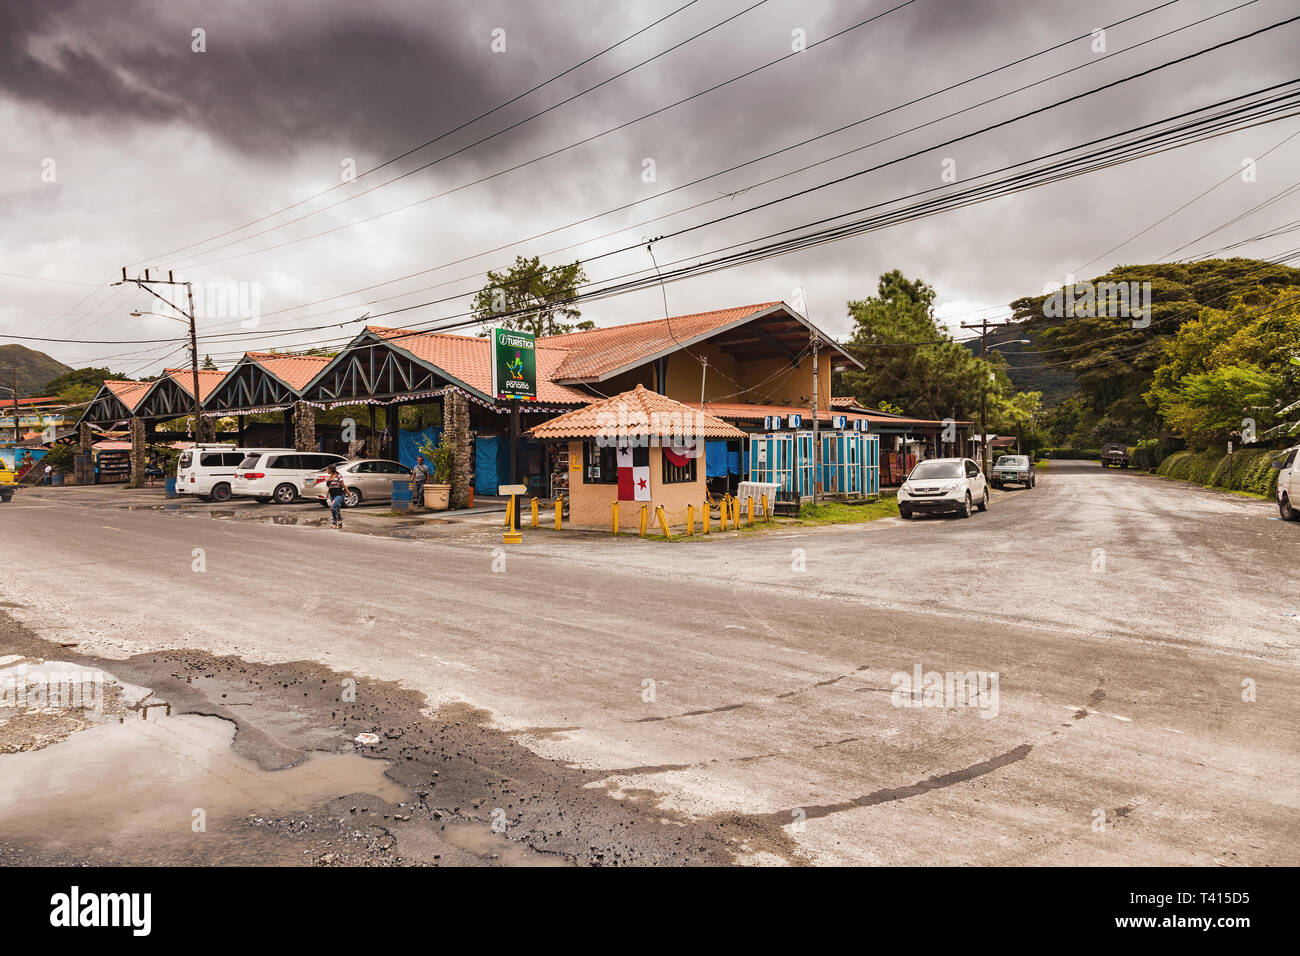 El Valle de Anton, Panama - November 24, 2016: The main street with the small market hall in El Valle de Anton a small town in the province of Panama. Stock Photo